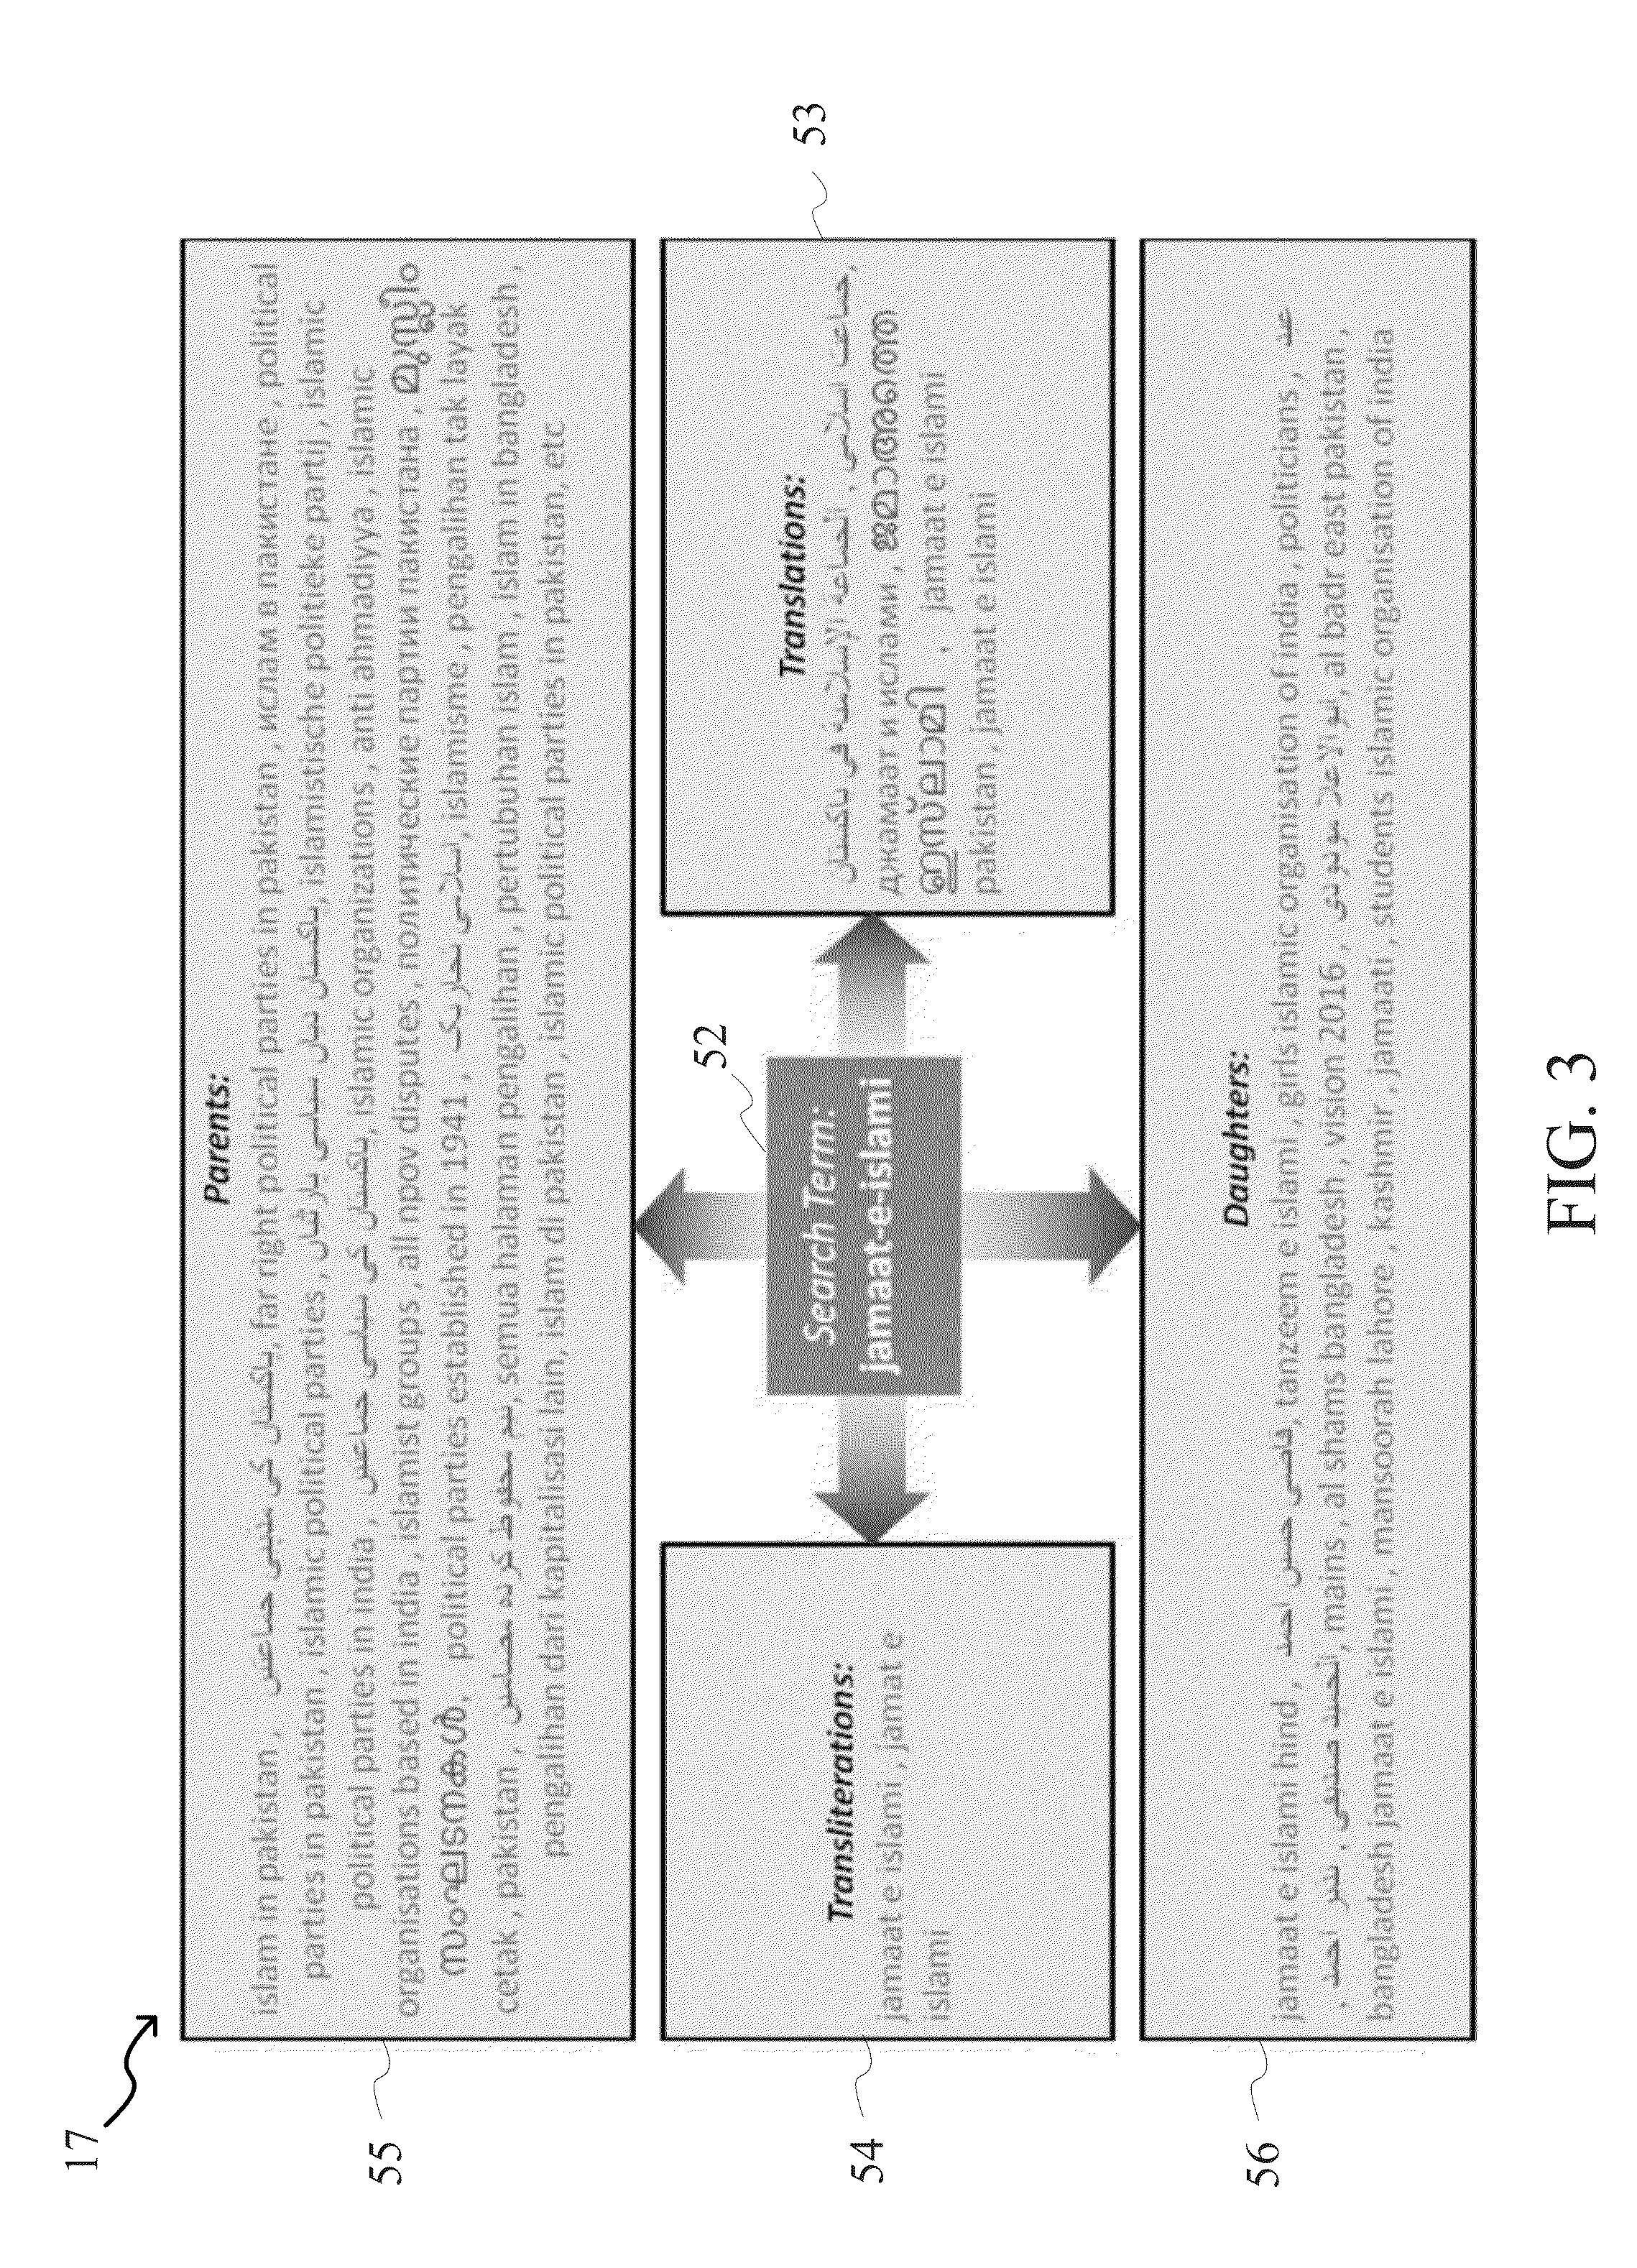 System and Method for Data Mining Using Domain-Level Context